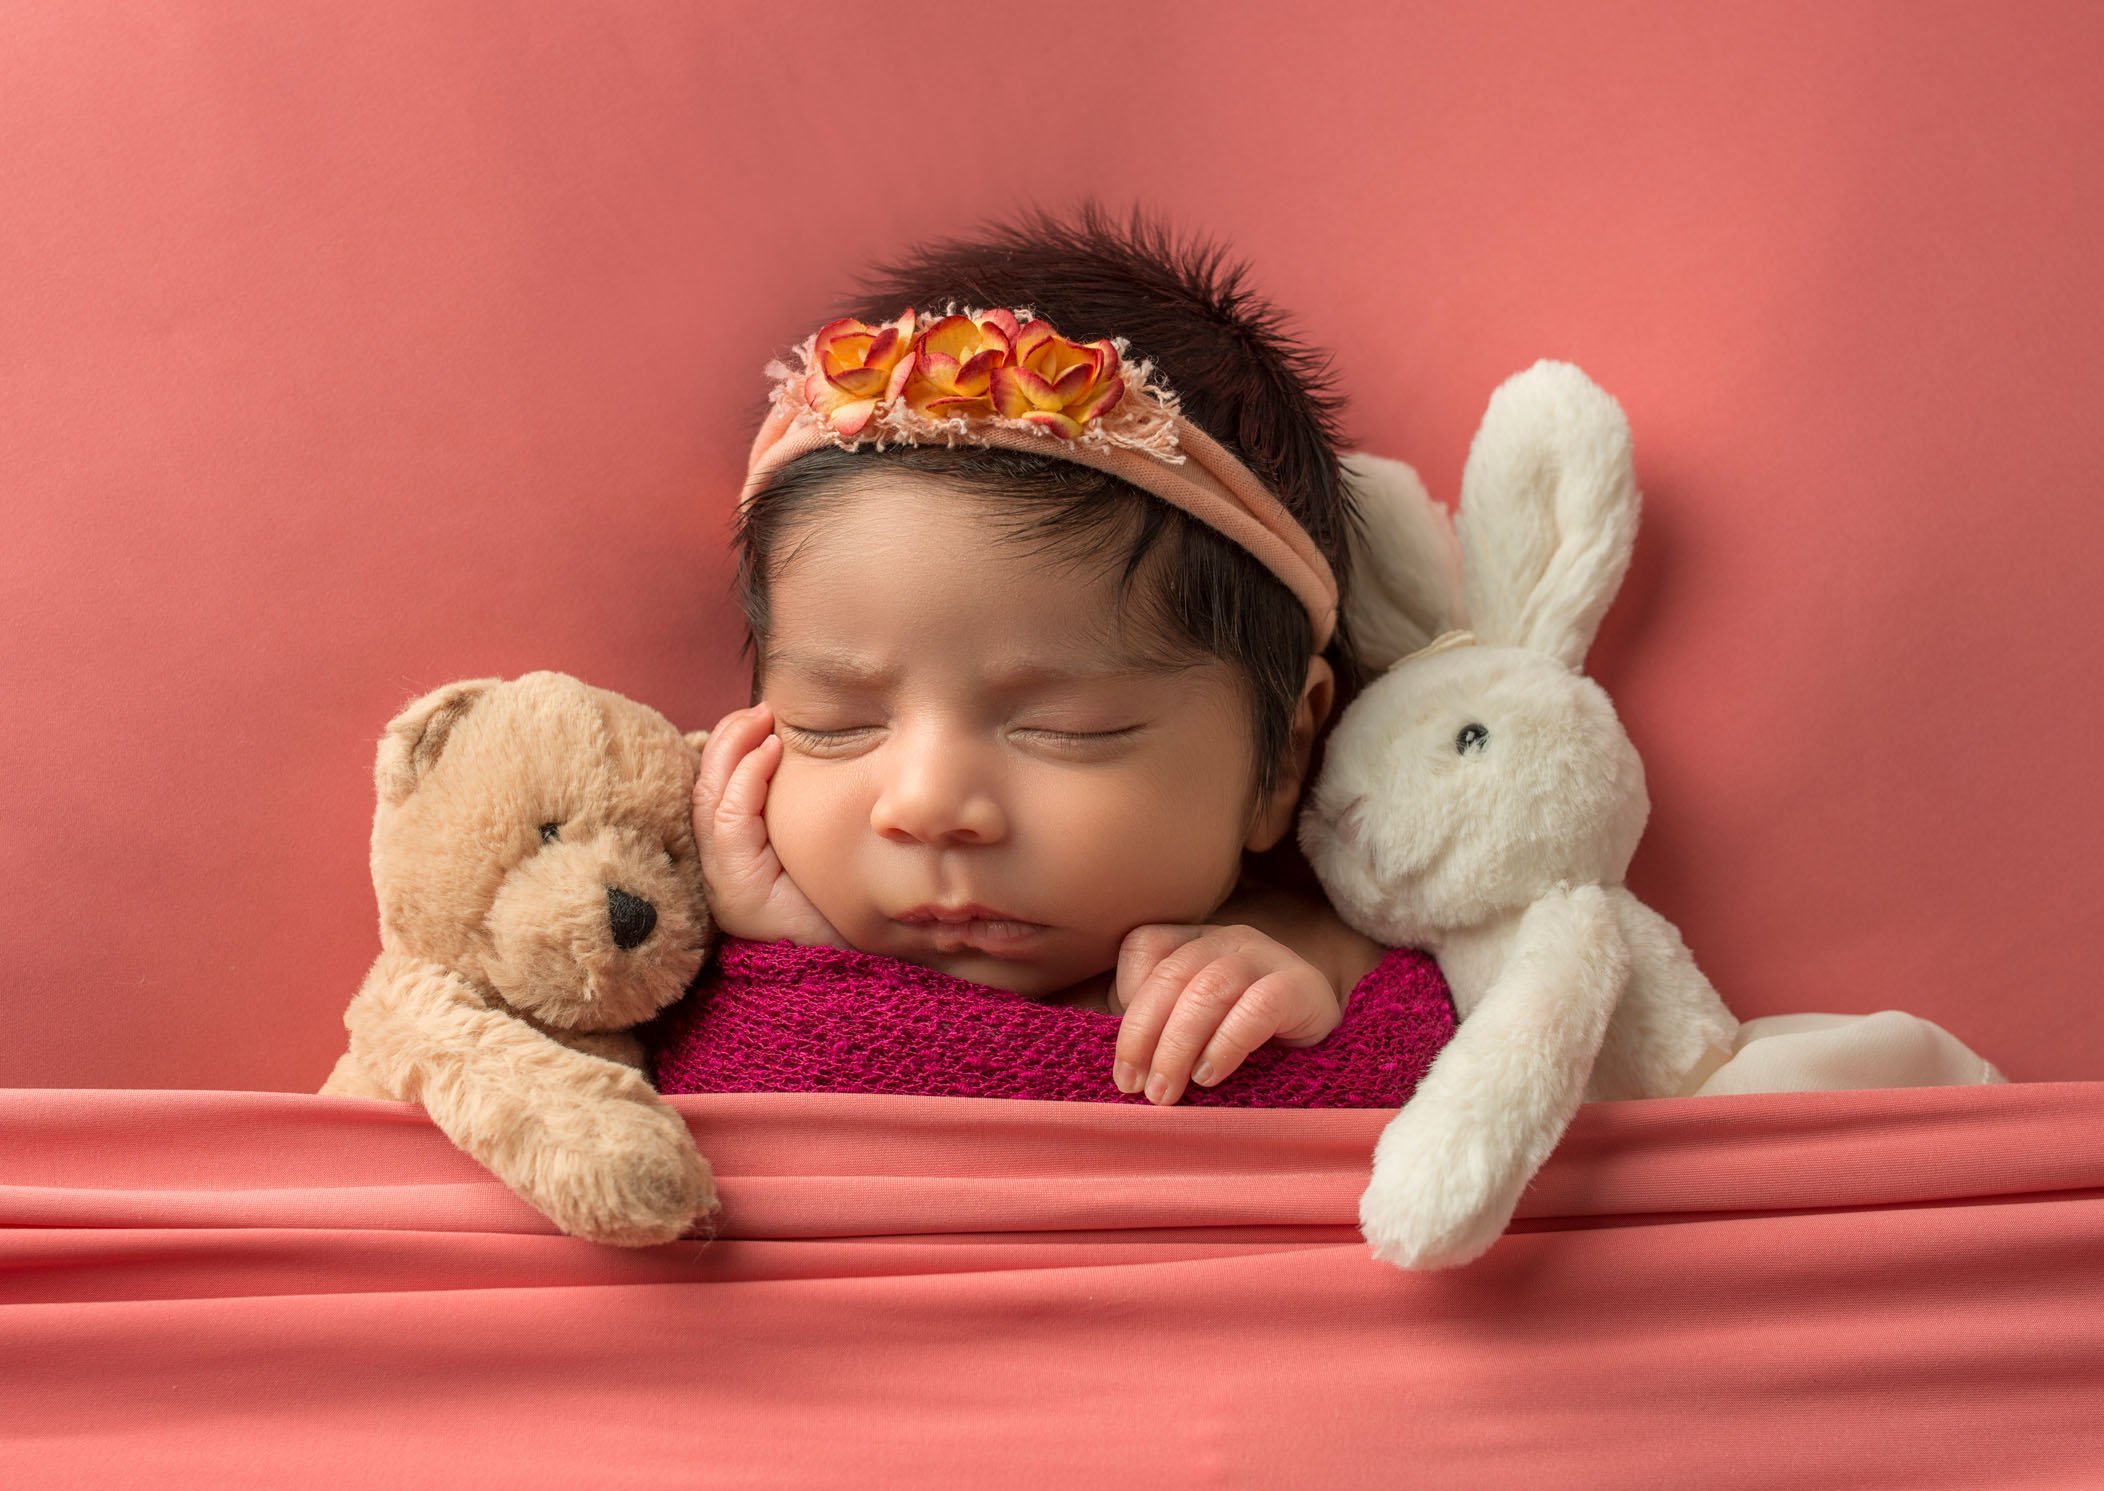 newborn baby girl sleeping with bunny and bear on coral background